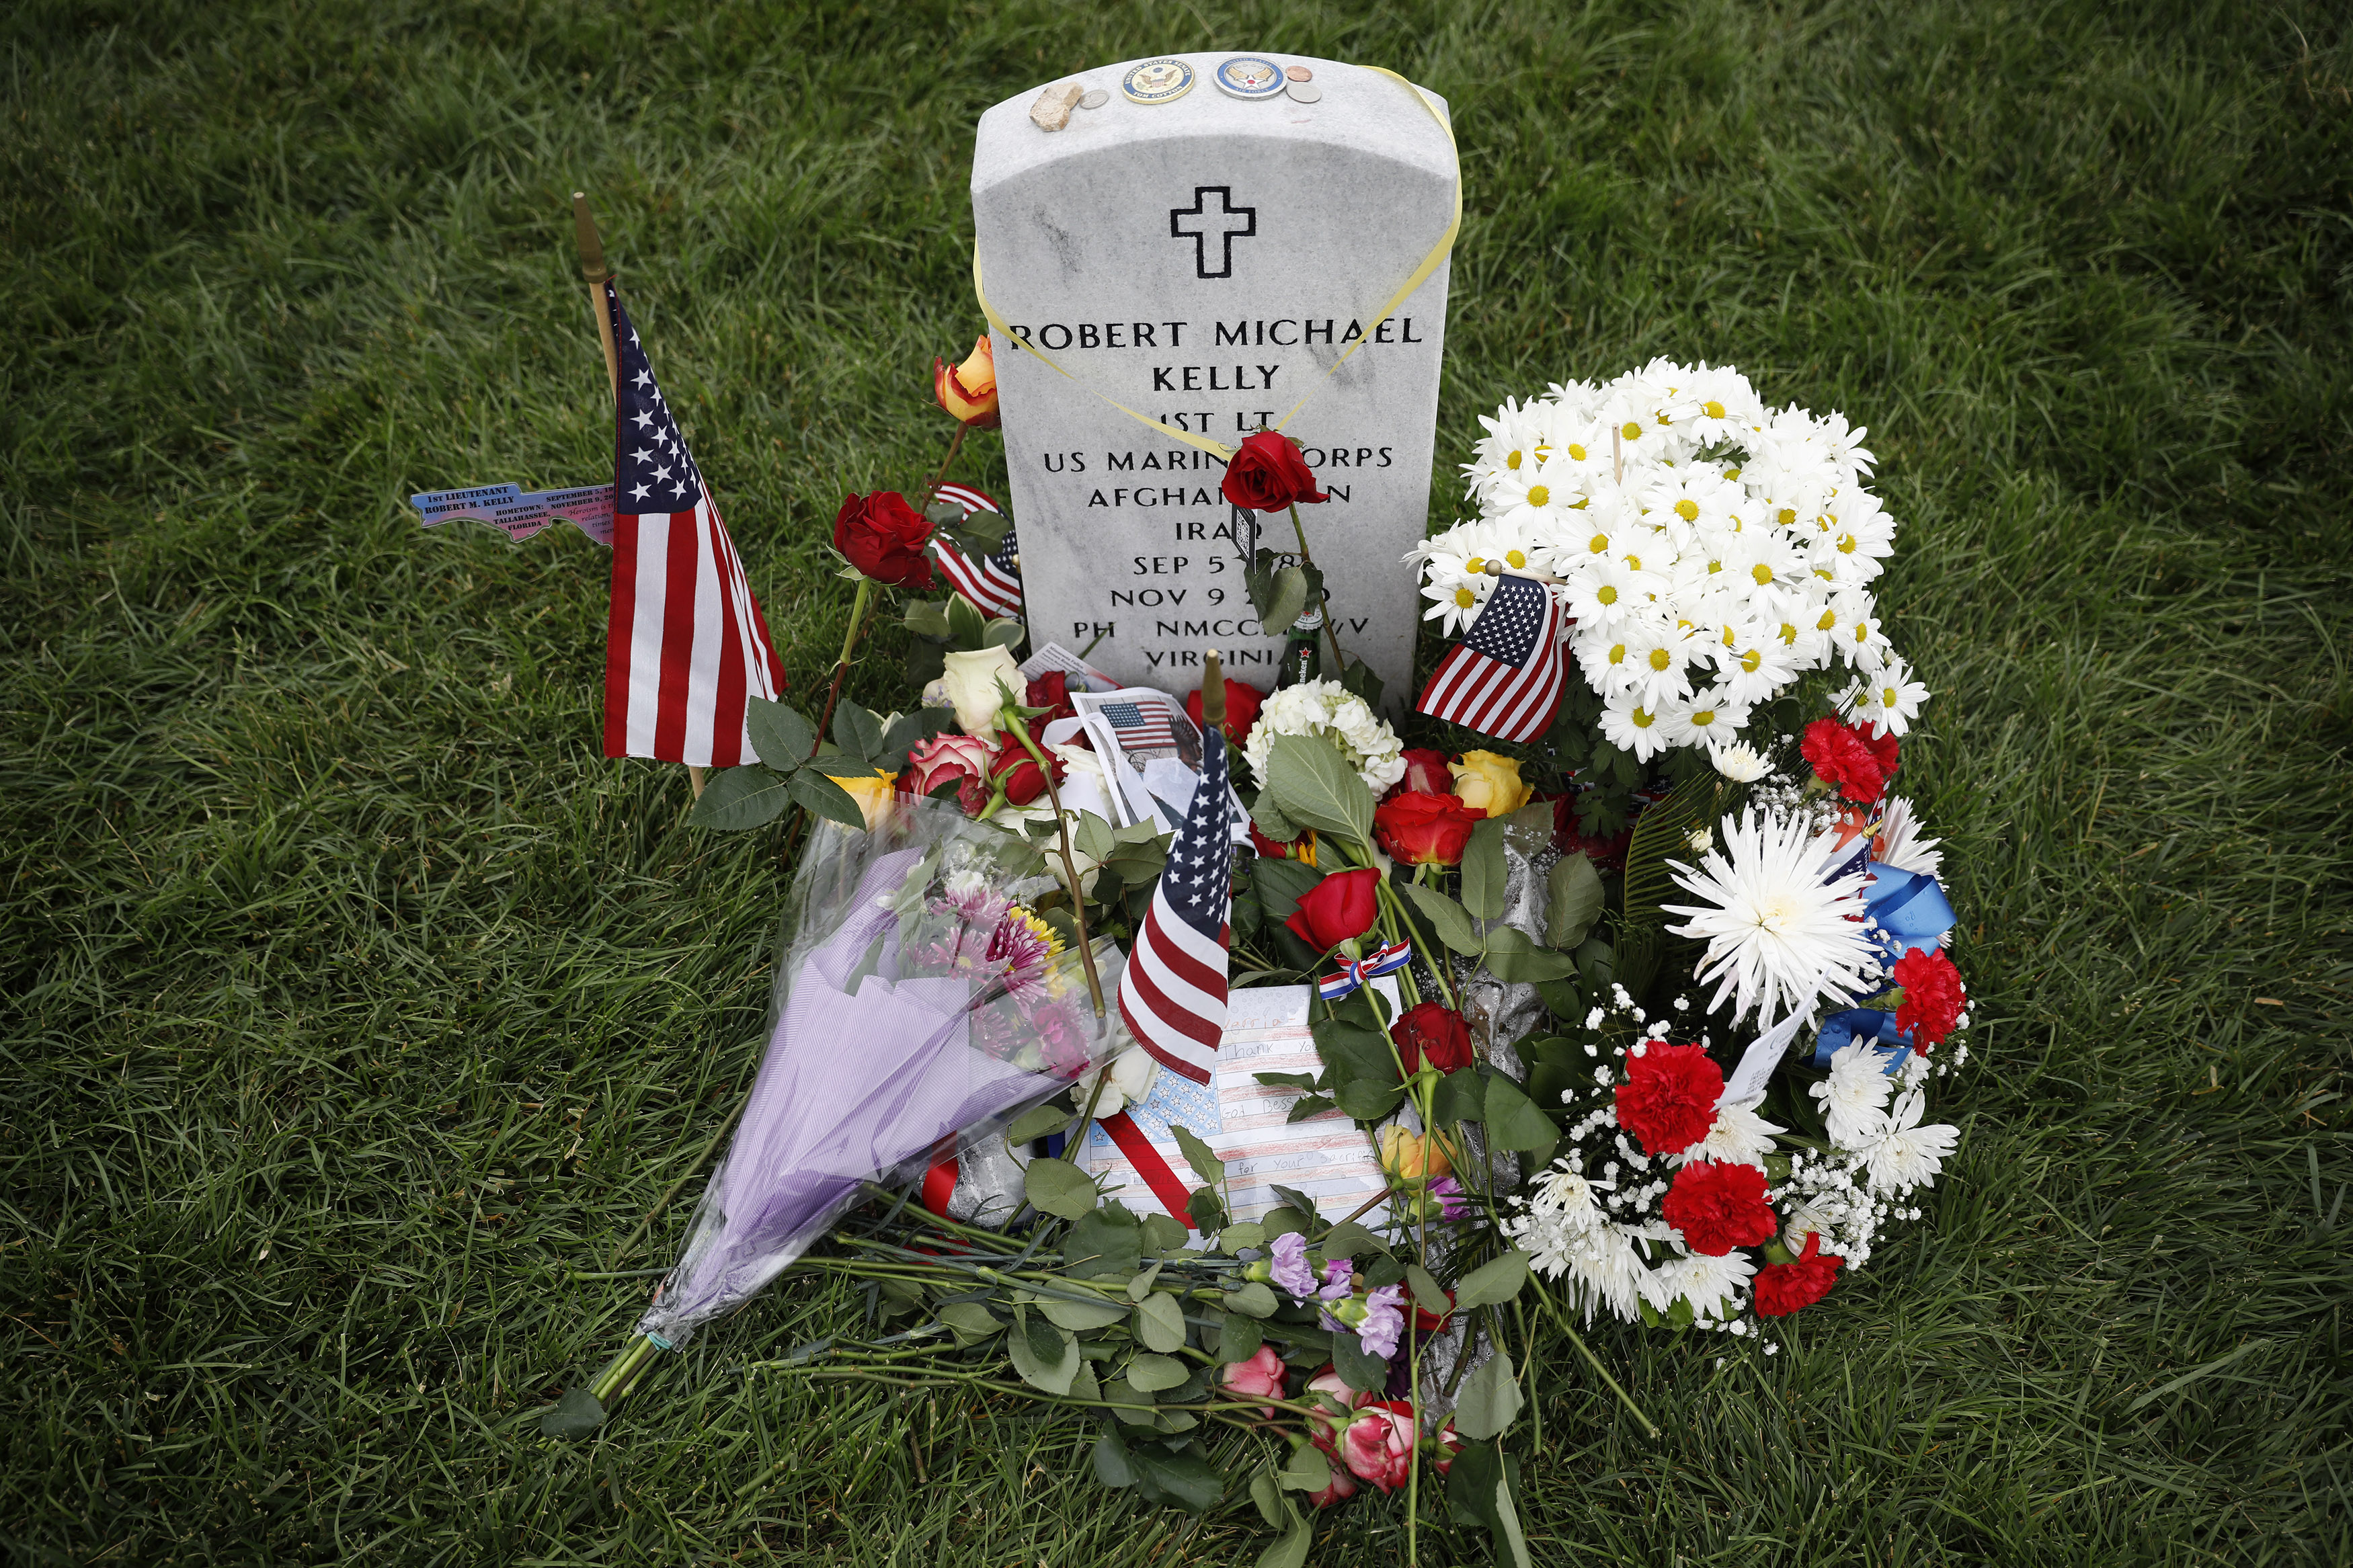 The grave of Marine Lt. Robert Kelly, son of White House Chief of Staff John Kelly, is seen at Arlington National Cemetery on Memorial Day, May 27, 2018 in Arlington, Virginia (Aaron P. Bernstein—Getty Images)